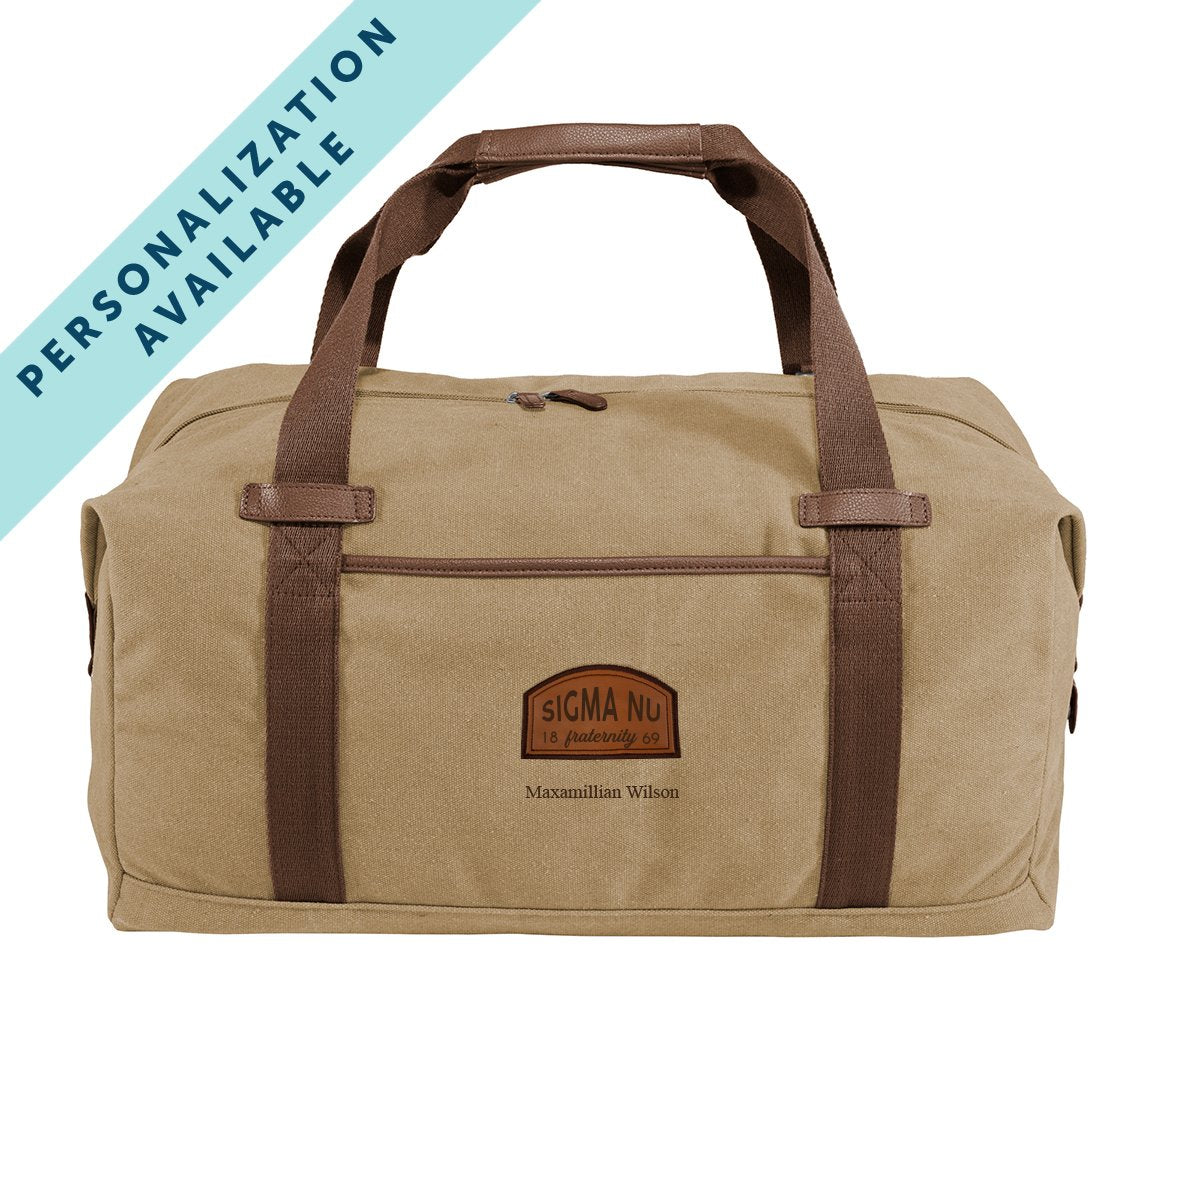 Sigma Nu Khaki Canvas Duffel With Leather Patch | Sigma Nu | Bags > Duffle bags